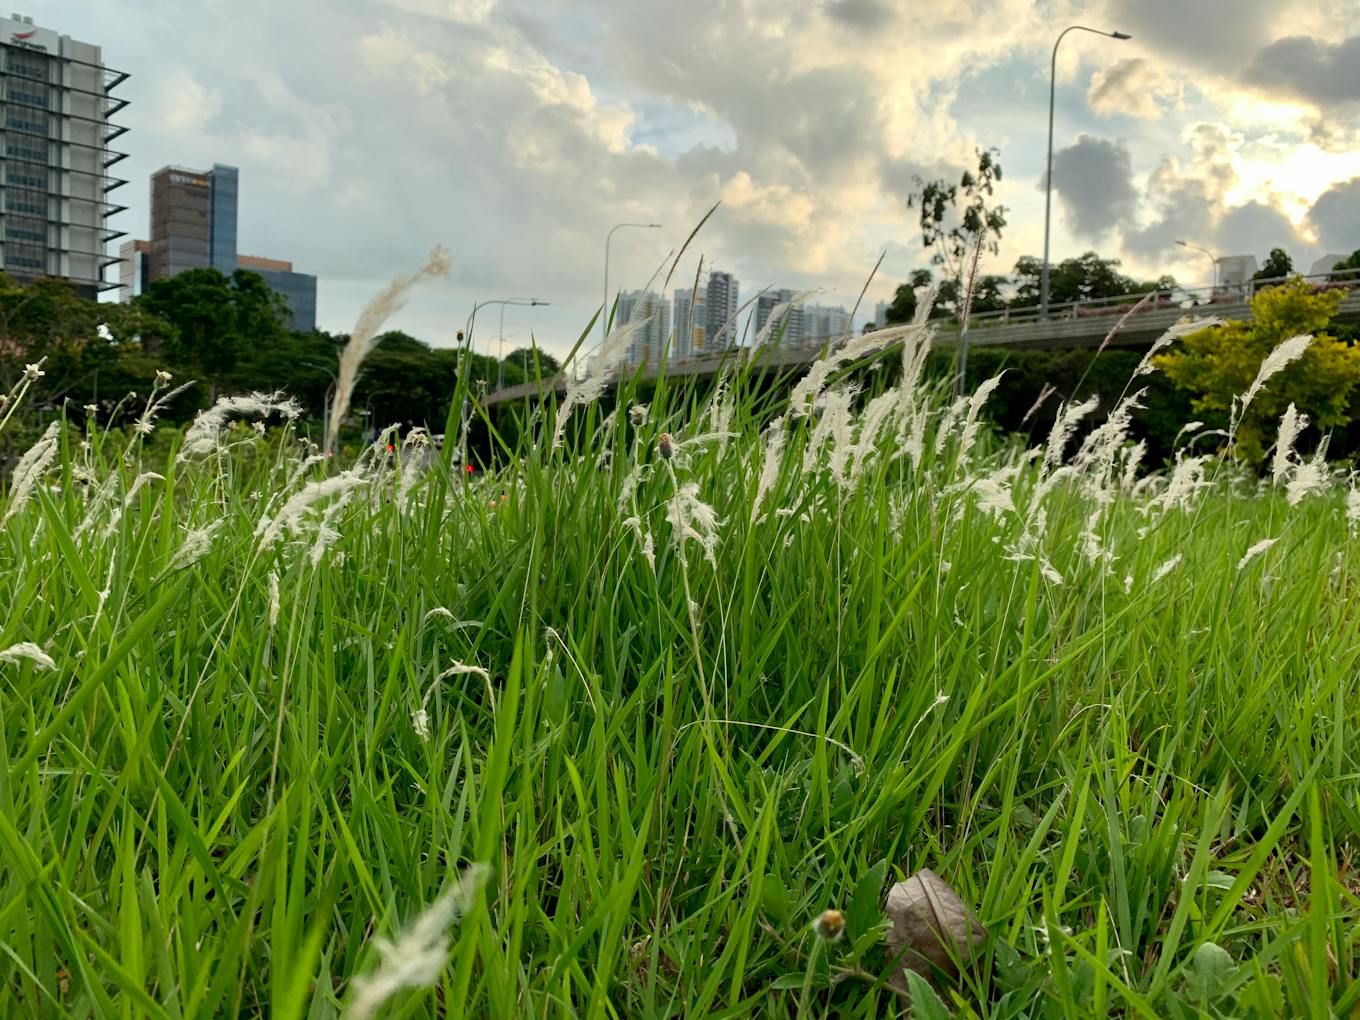 Lalang growing near an underpass in Tiong Bahru, Singapore. Image: Robin Hicks/Eco-Business